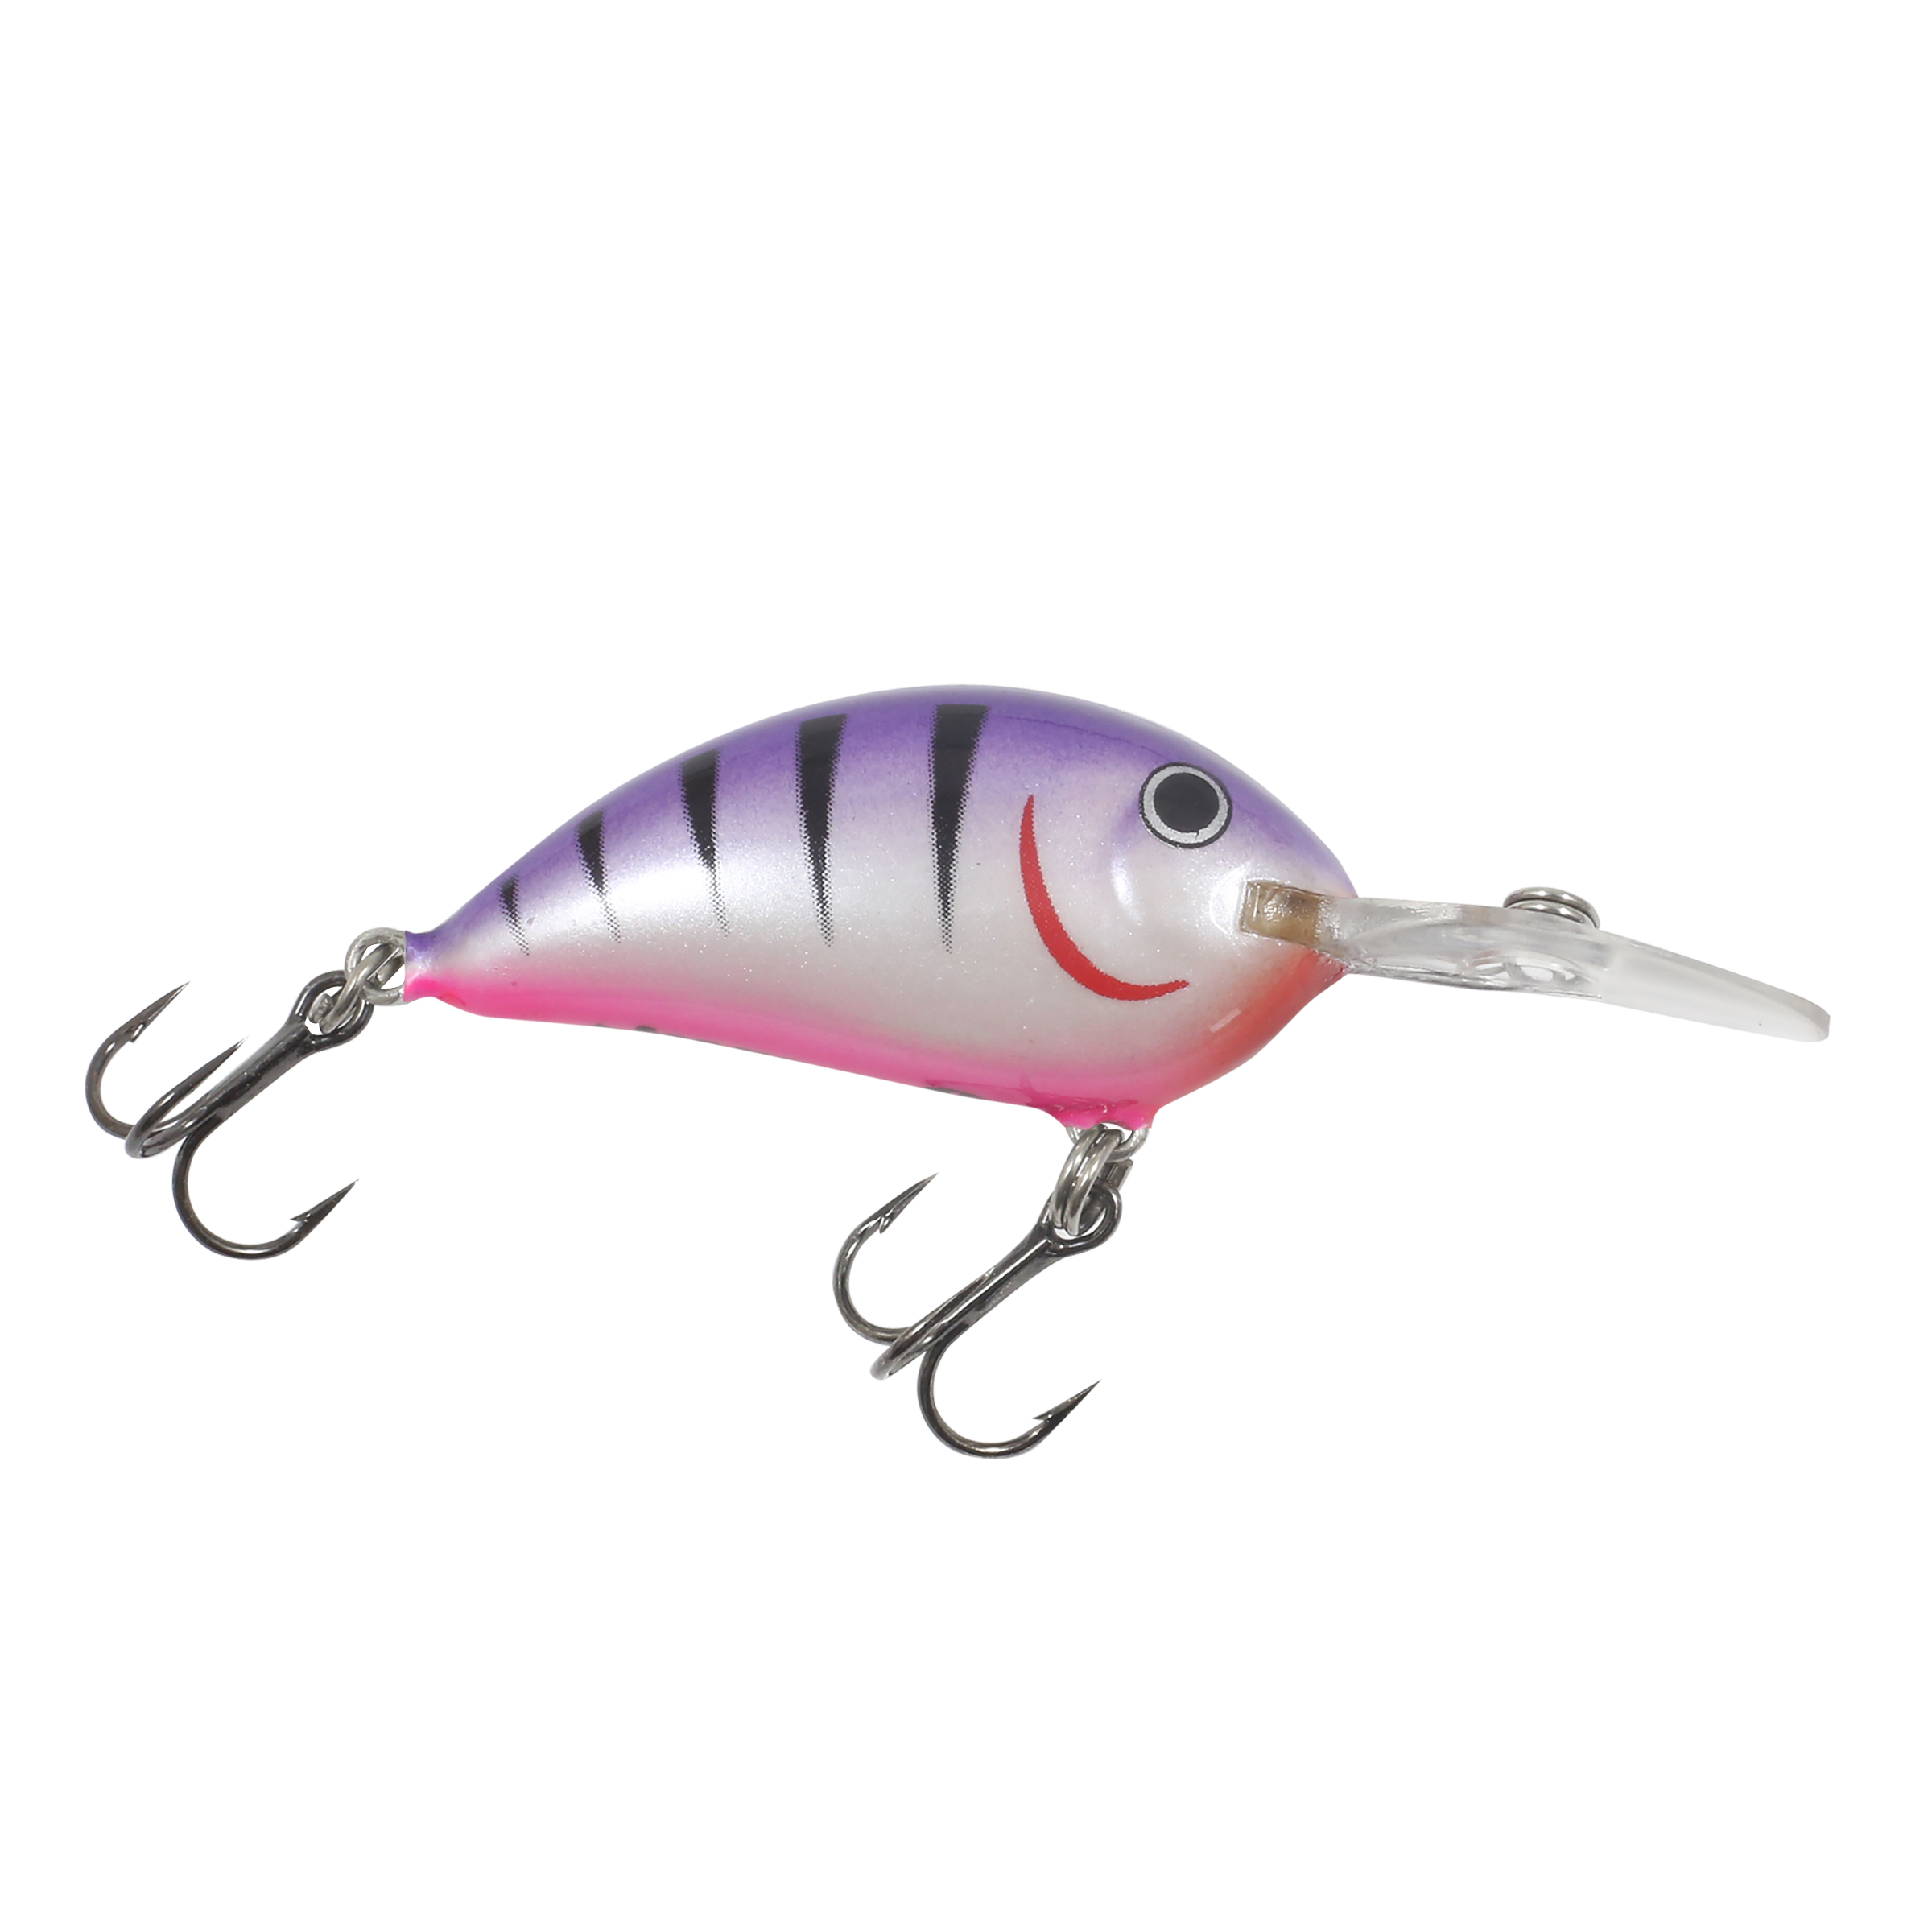 Northland Fishing Tackle Rumble Bug in Purple Tiger color.